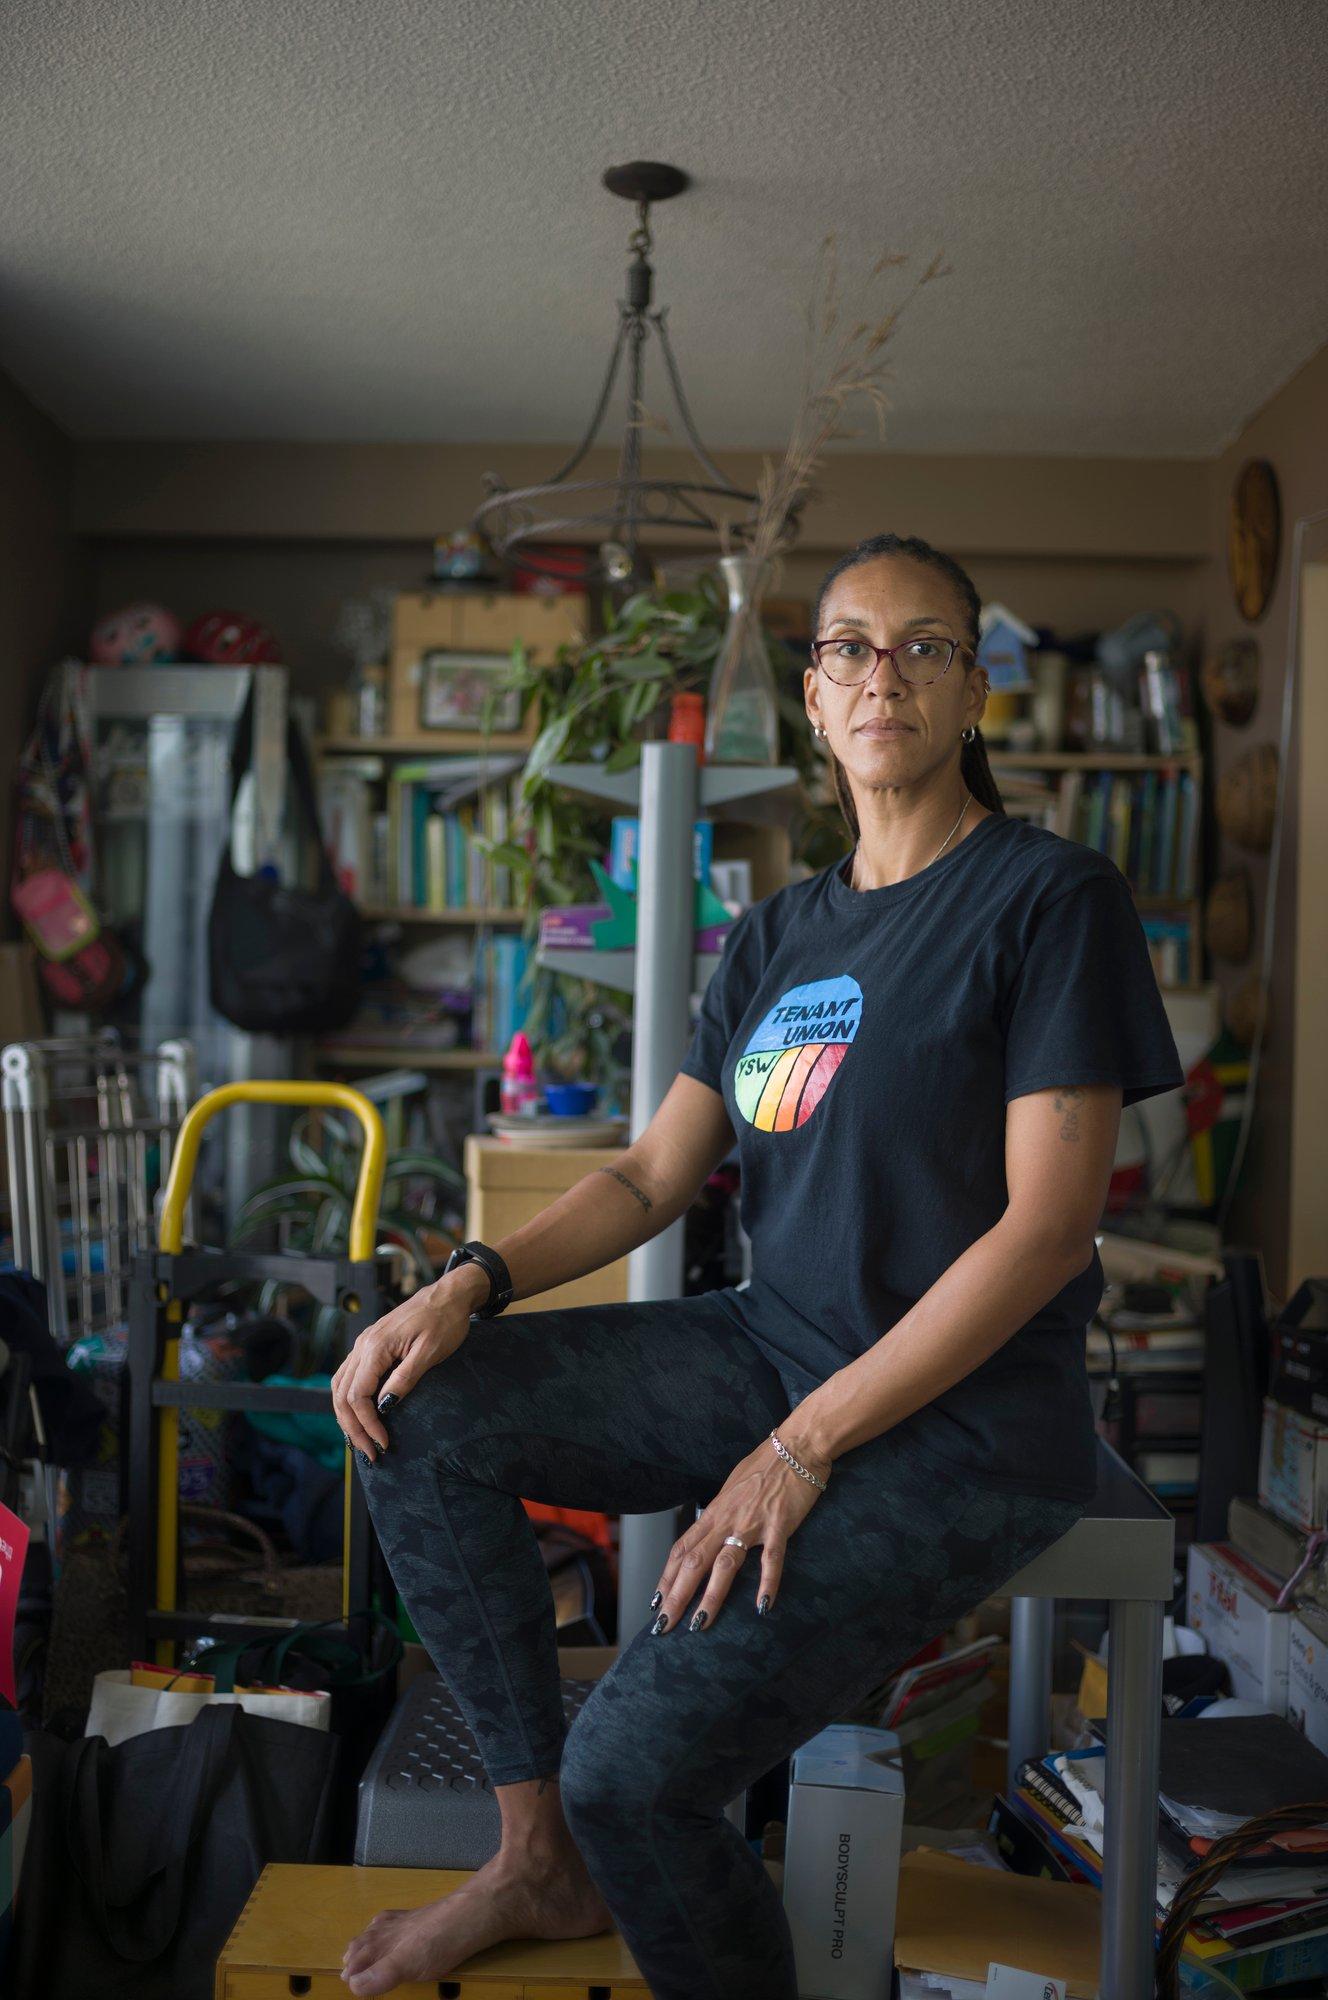 York South-Weston Tenant Union organizer Sharlene Henry, pictured here at her apartment in Toronto. After a series of above-guideline rent hikes, Henryâs rent is now more than 50 per cent higher than when she first moved in. (Photograph by Ian Willms)